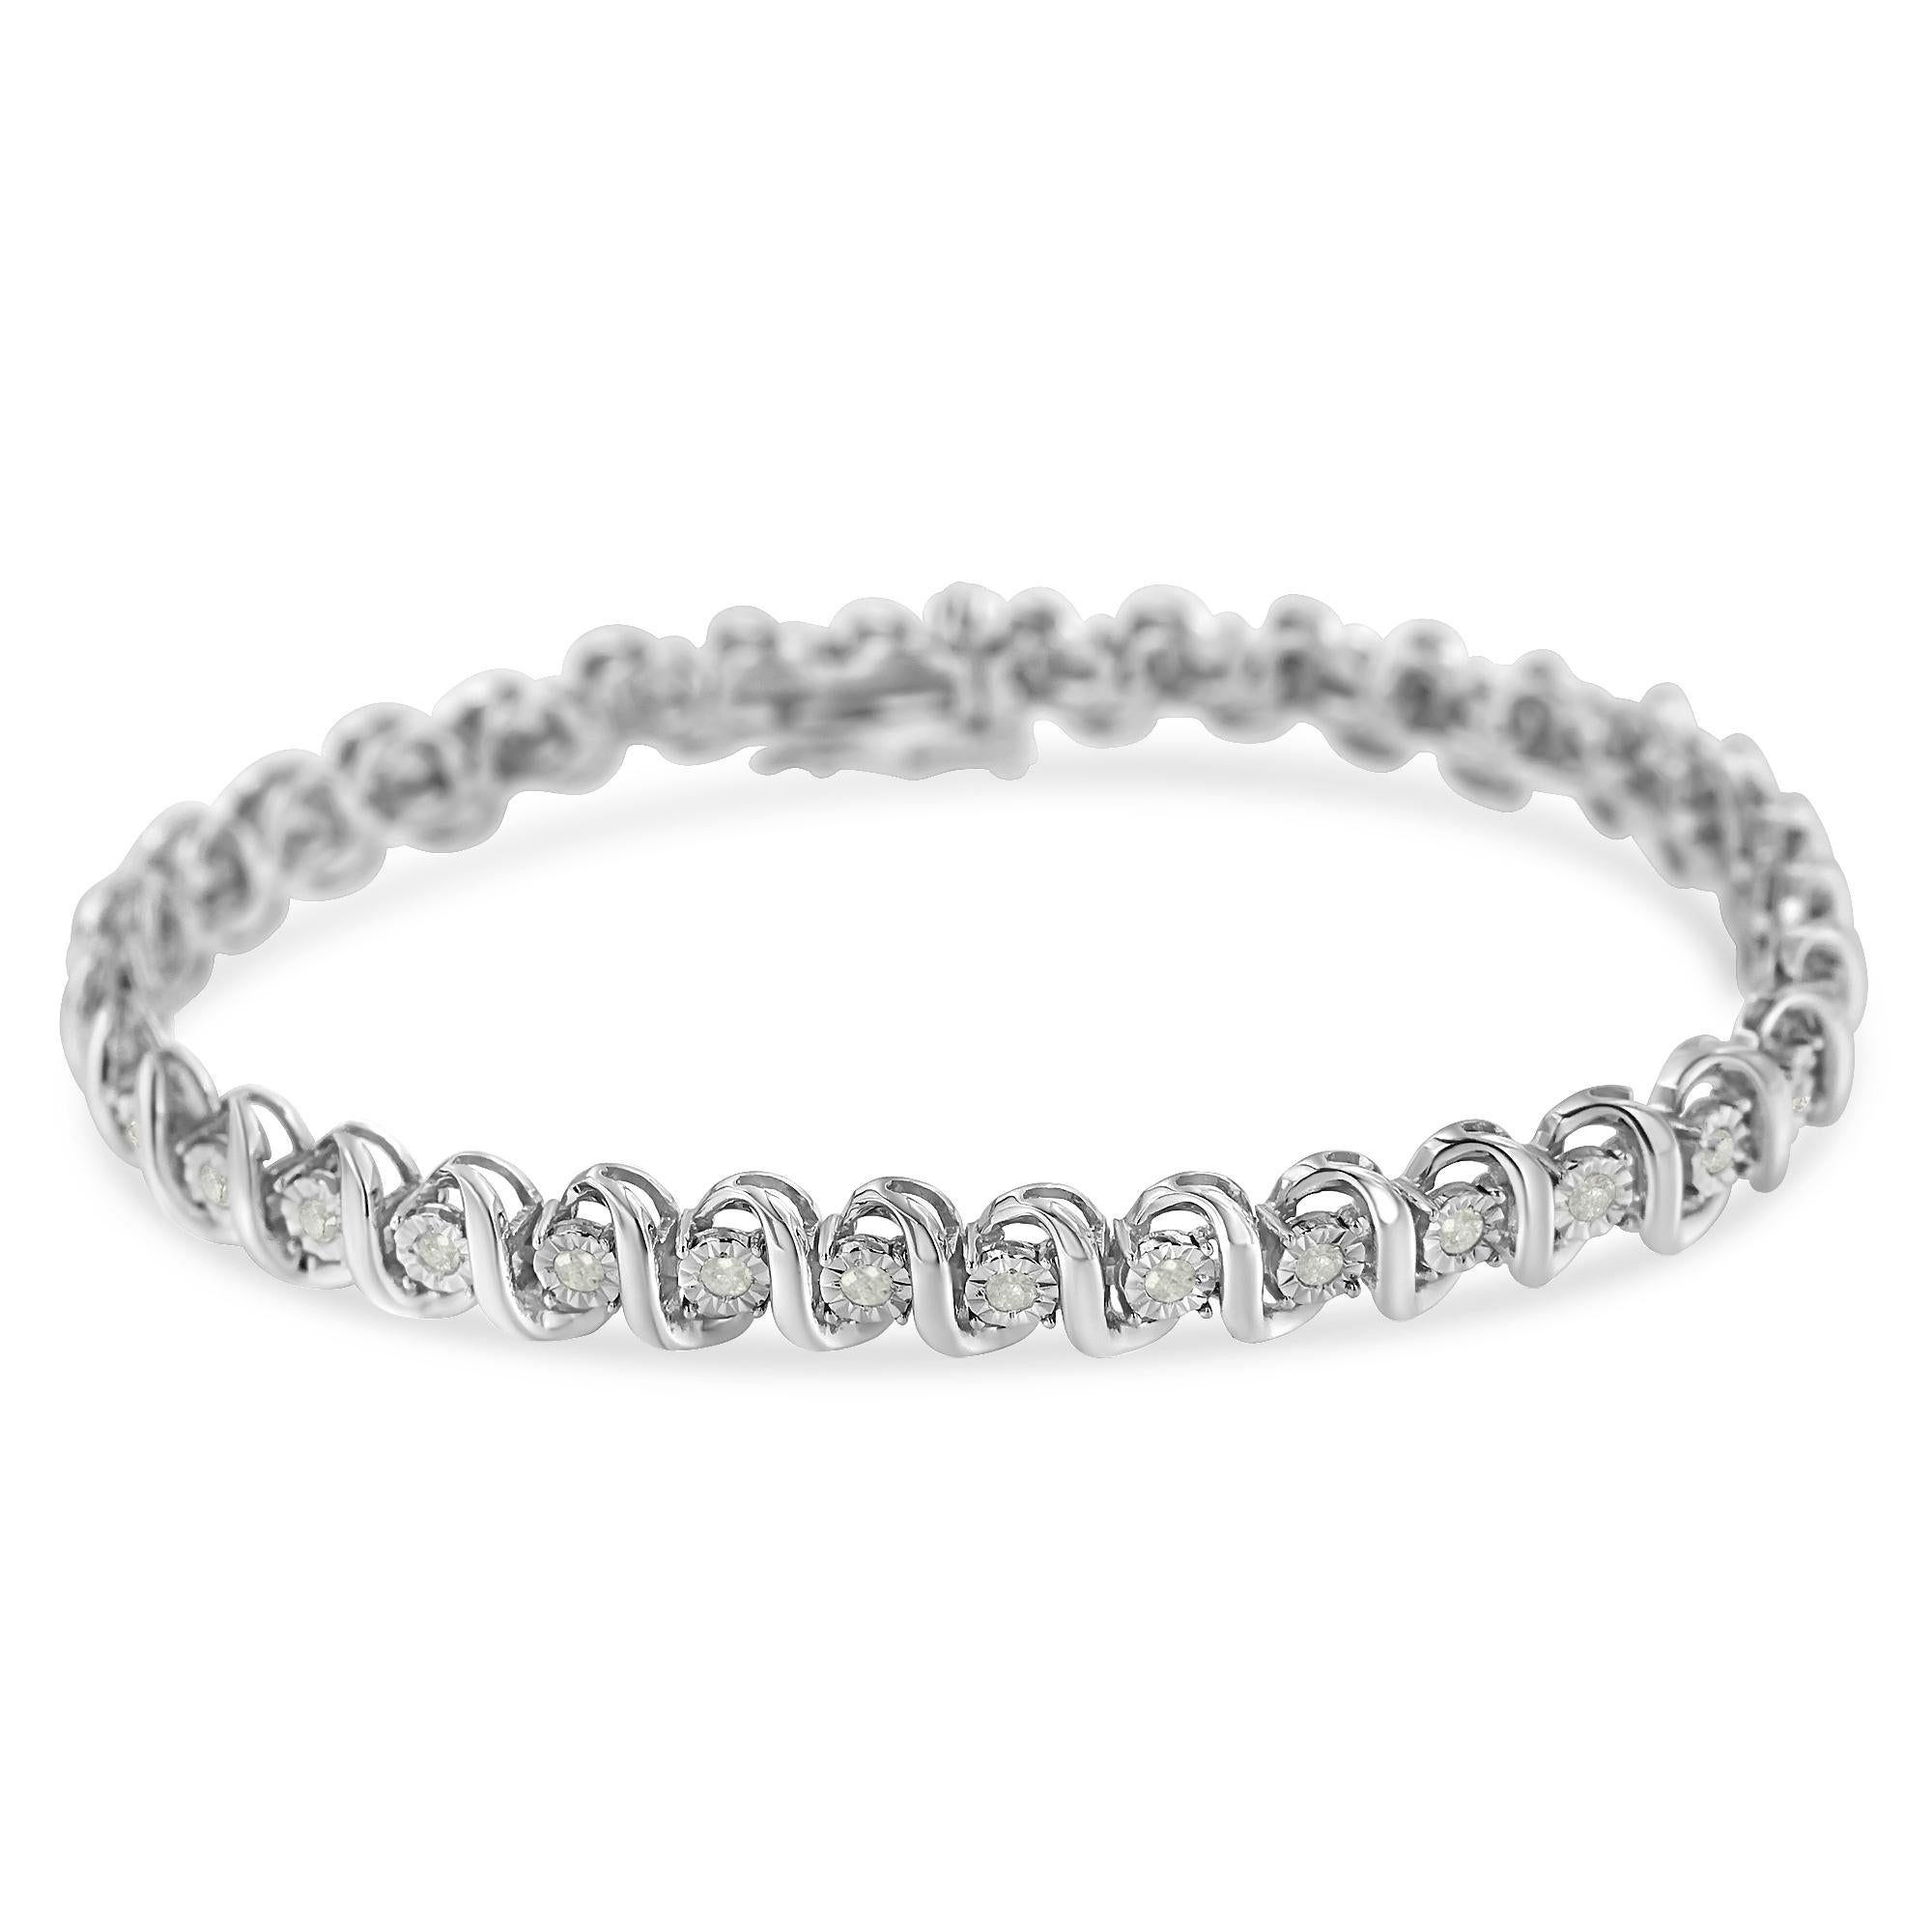 Elegant and timeless, this gorgeous sterling silver tennis bracelet features 1.0 carat total weight of round, miracle set diamonds. The tennis bracelet features S curved links with a single petite genuine round near colorless I-J color diamonds.